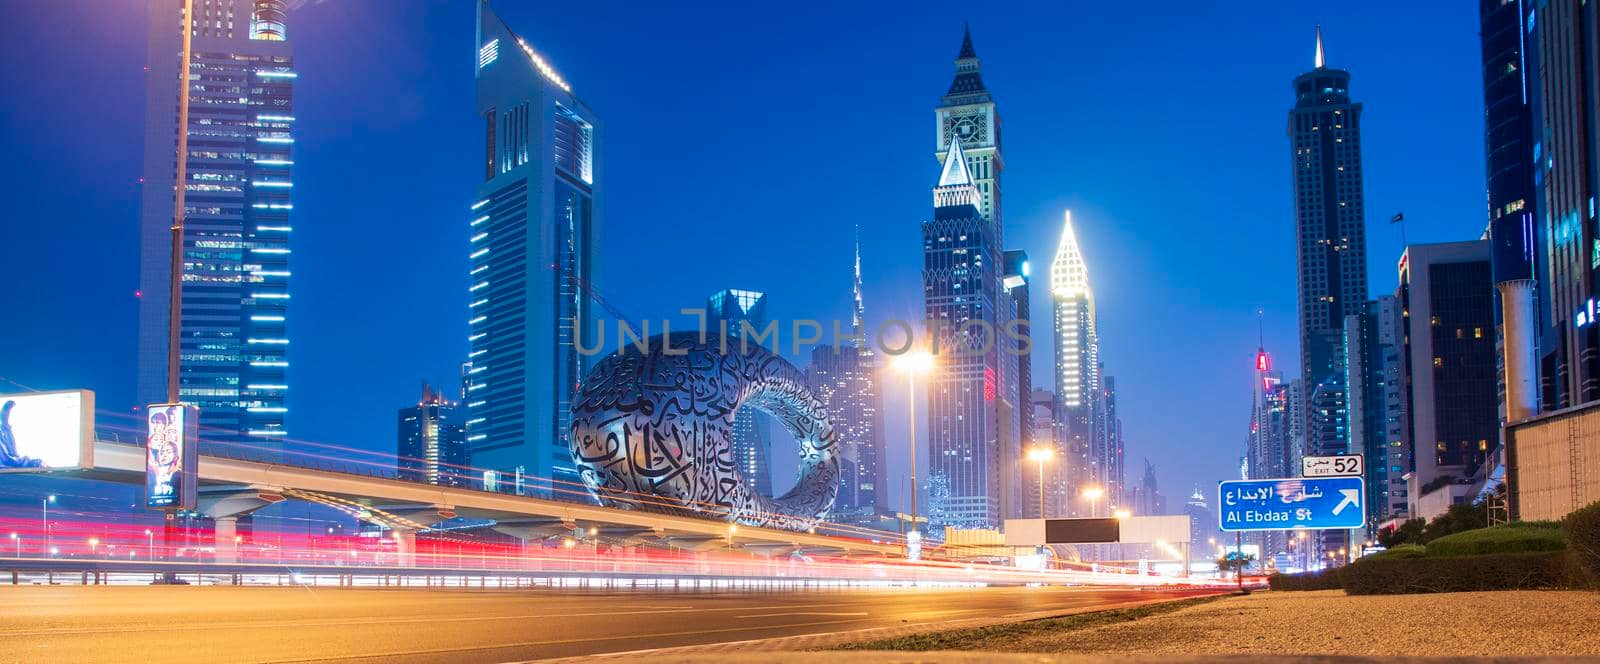 Main road of a United Arab Emirates, Shekh Zayed road. Shot taken in Dubai. Many of famous buildings can be seen as well as metro station and "Museum of future" by pazemin